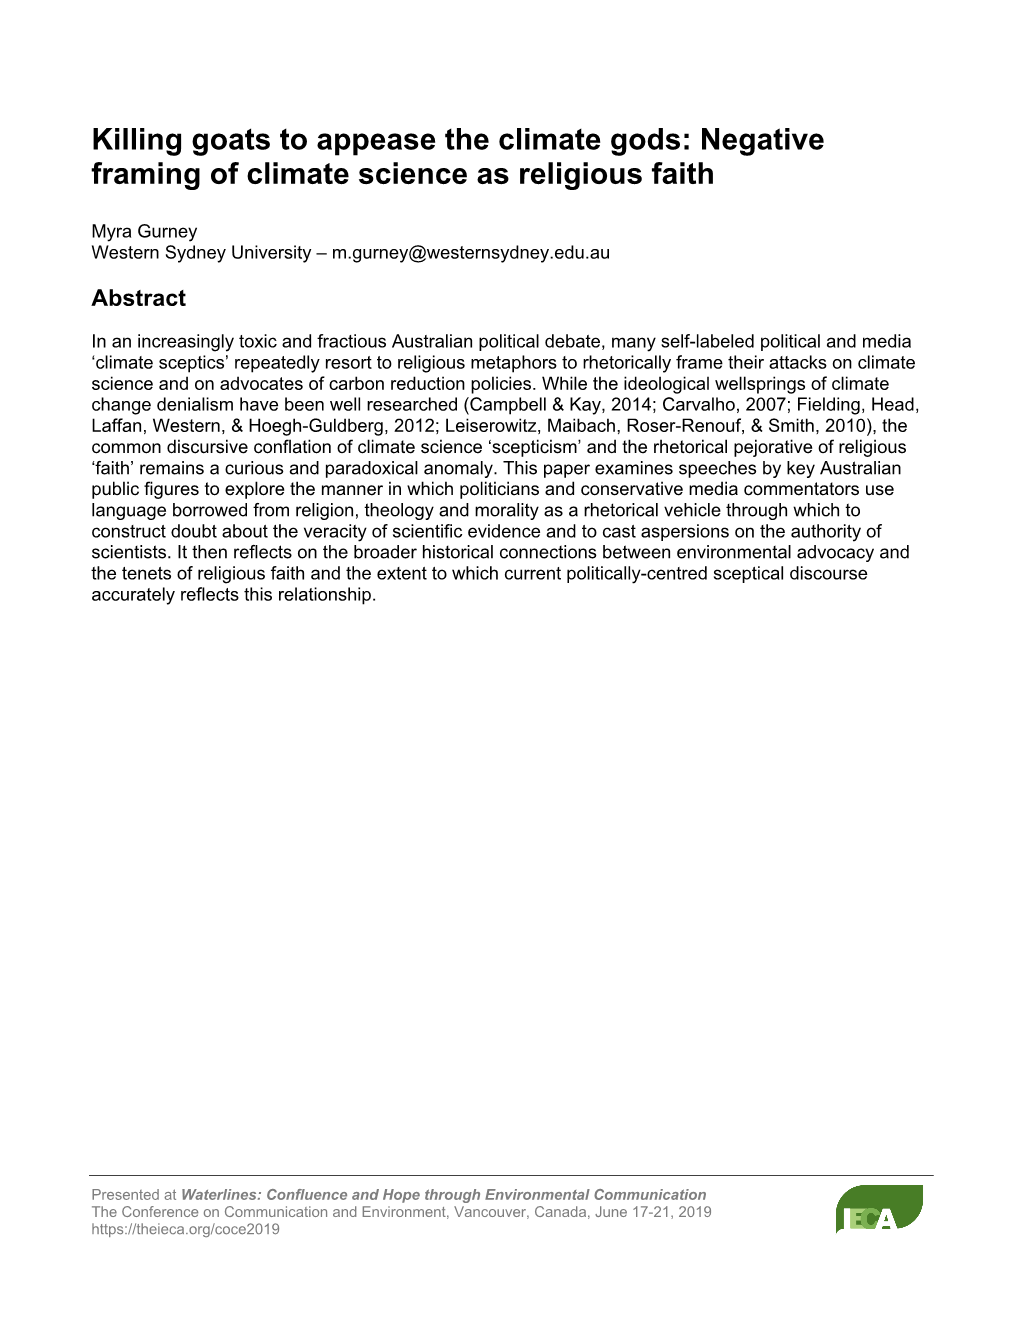 Killing Goats to Appease the Climate Gods: Negative Framing of Climate Science As Religious Faith